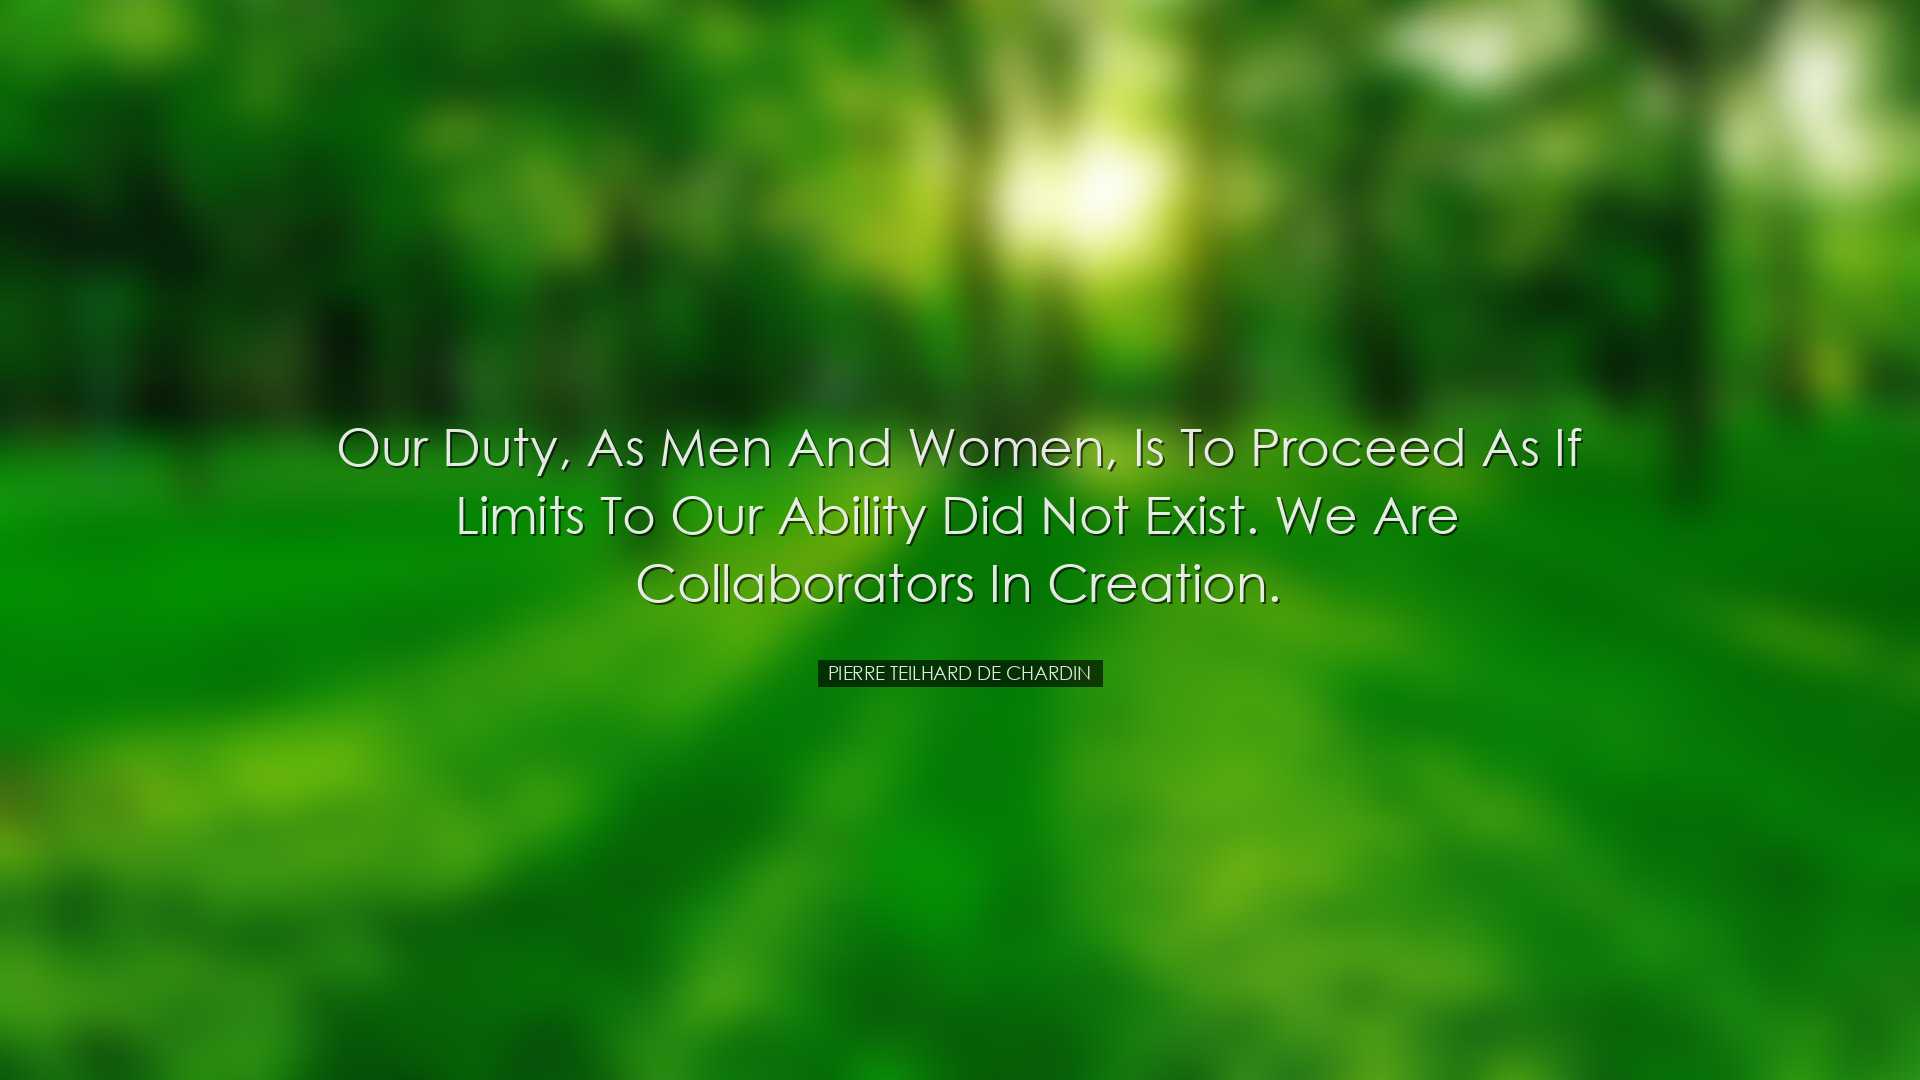 Our duty, as men and women, is to proceed as if limits to our abil